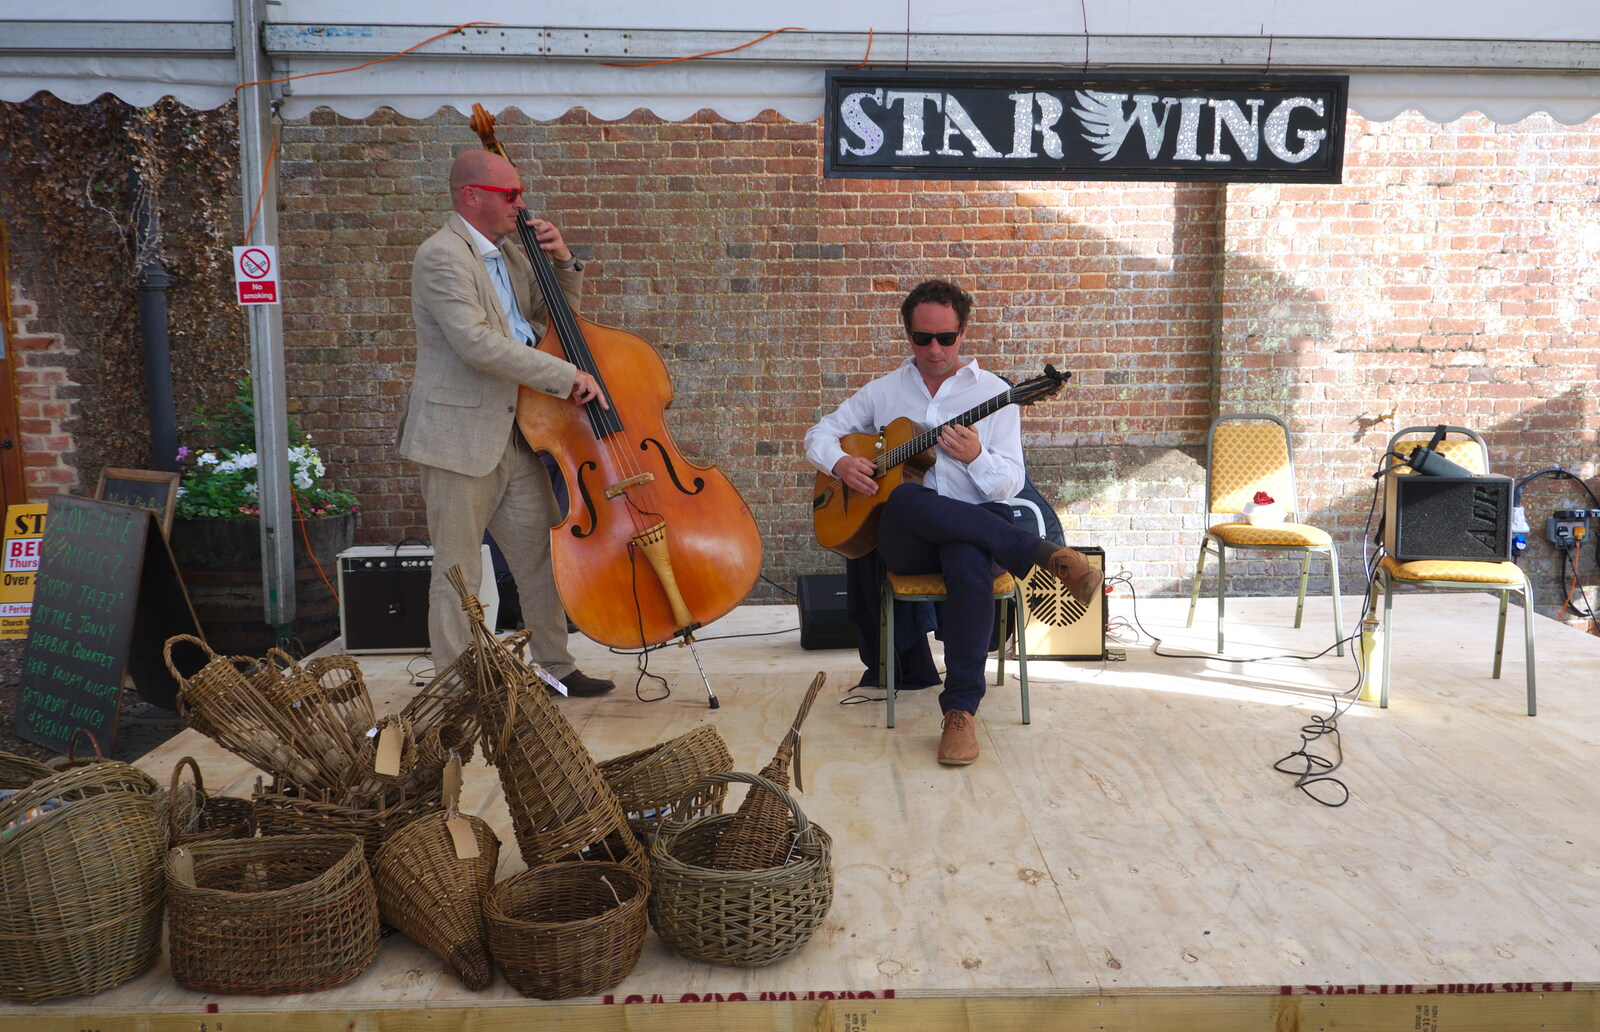 Funky jazz on stage from The Shakesbeer Festival, Star Wing Brewery, Redgrave, Suffolk - 13th July 2019